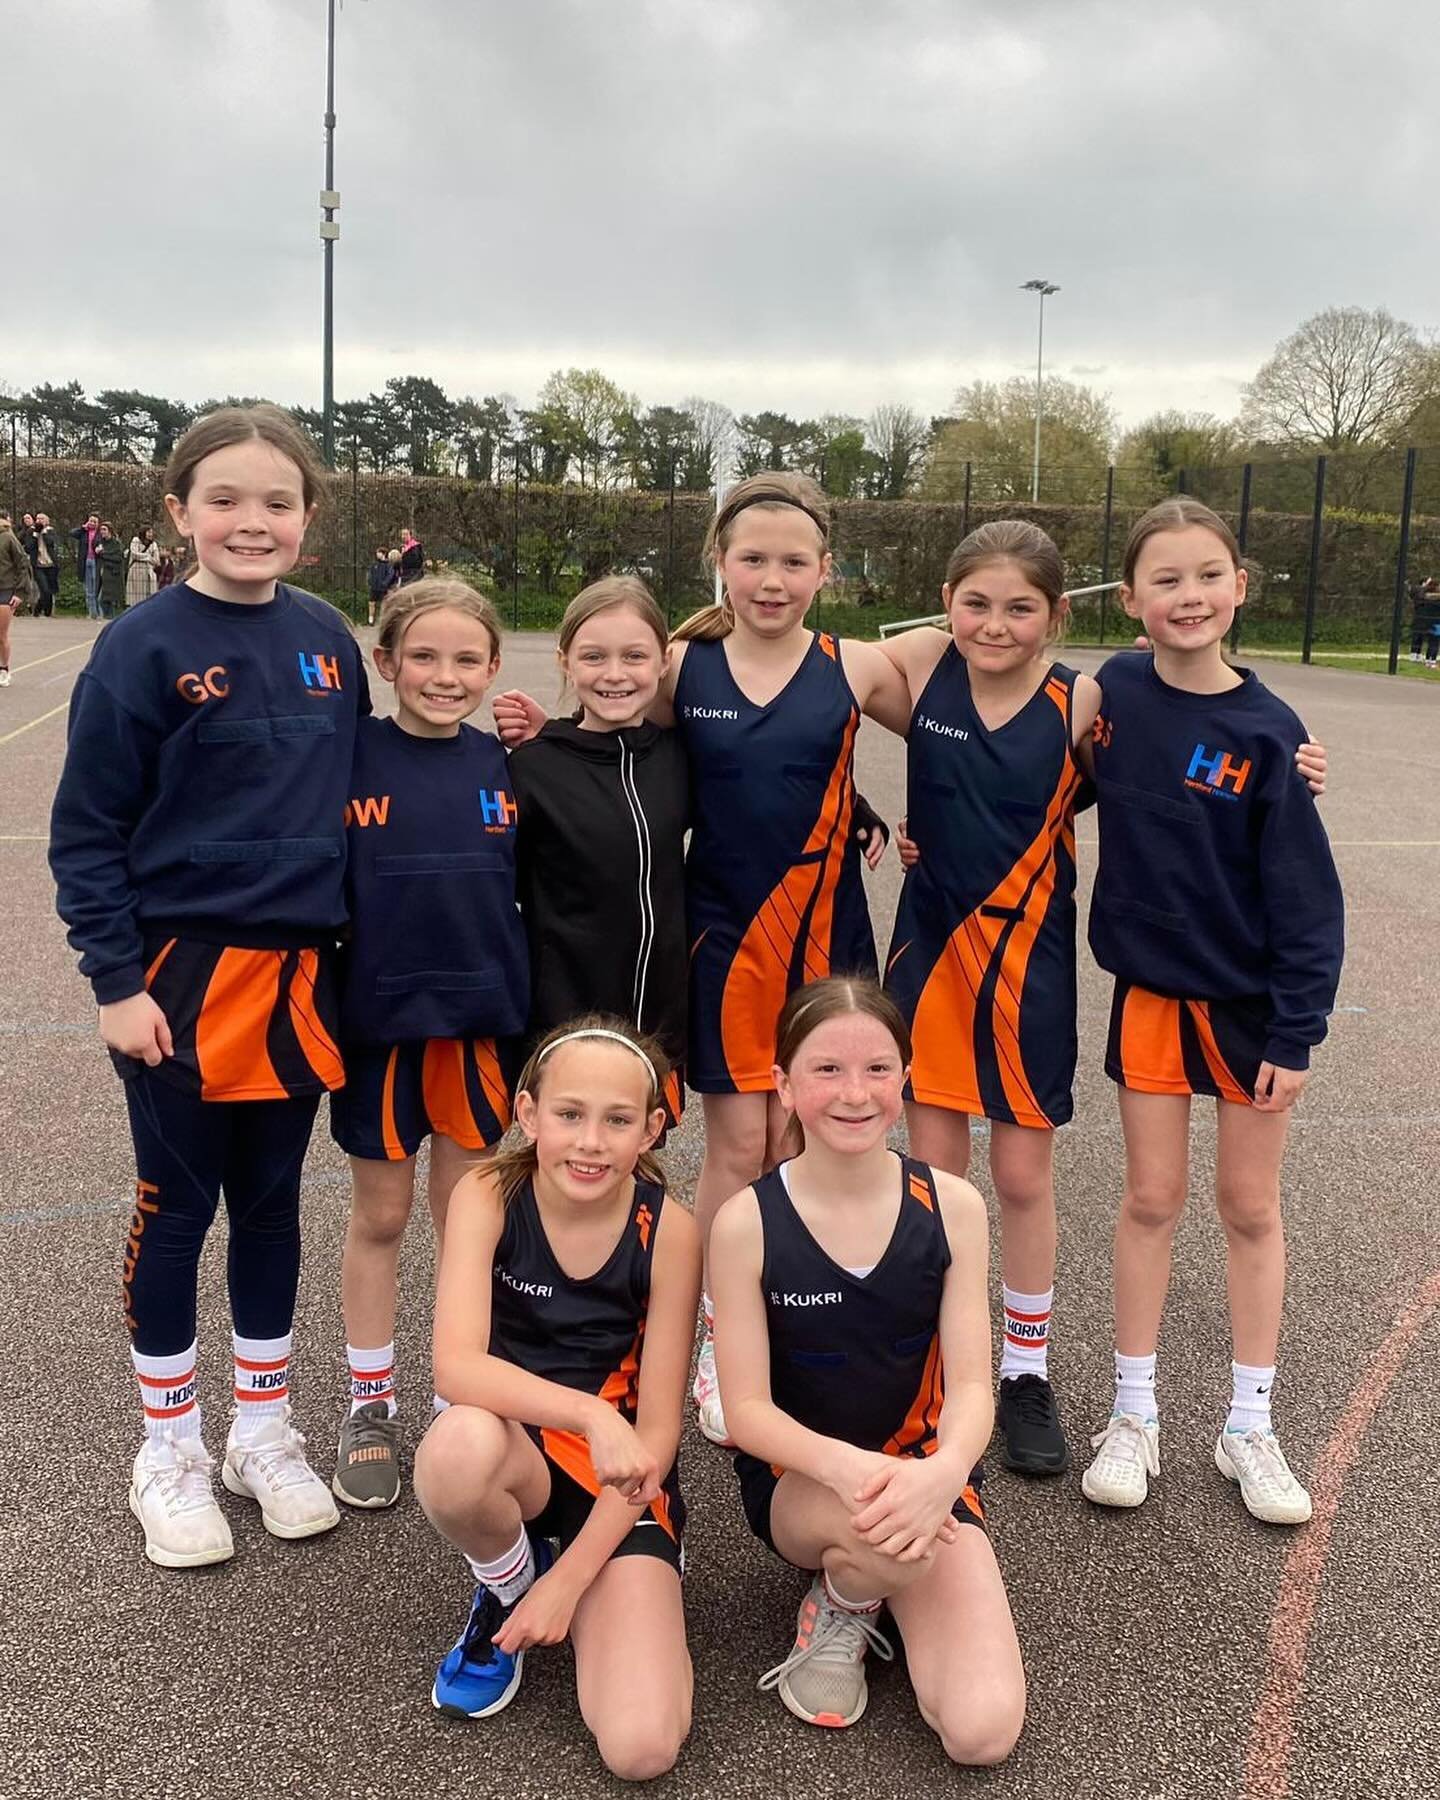 A superb performance by the Navy&rsquo;s this afternoon &hellip; a solid 16-6 win. The girls were strong from the start and played brilliantly until the final whistle. Well done girls and especially to Daisy!
OPOM and PPOM to Mia Eva &amp; Daisy #blu